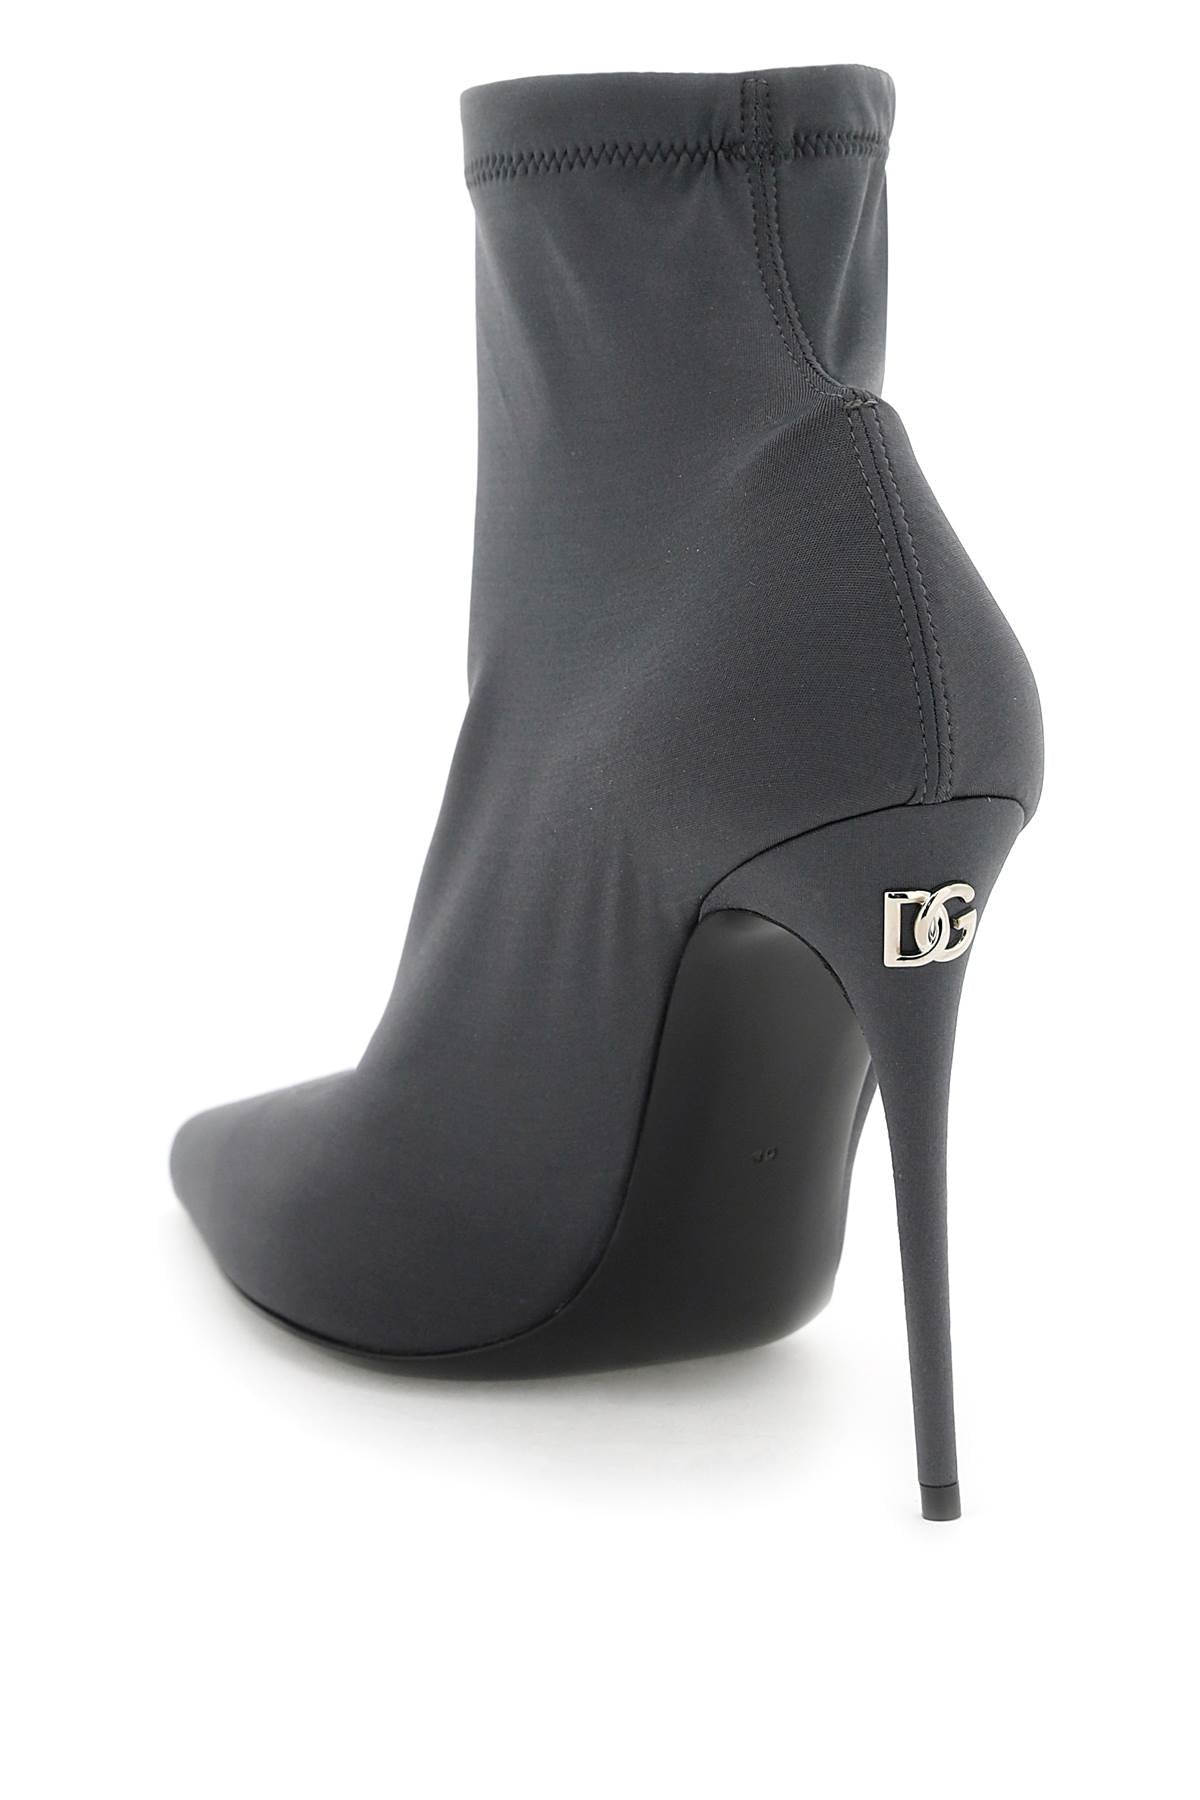 Dolce & gabbana stretch jersey ankle boots-2